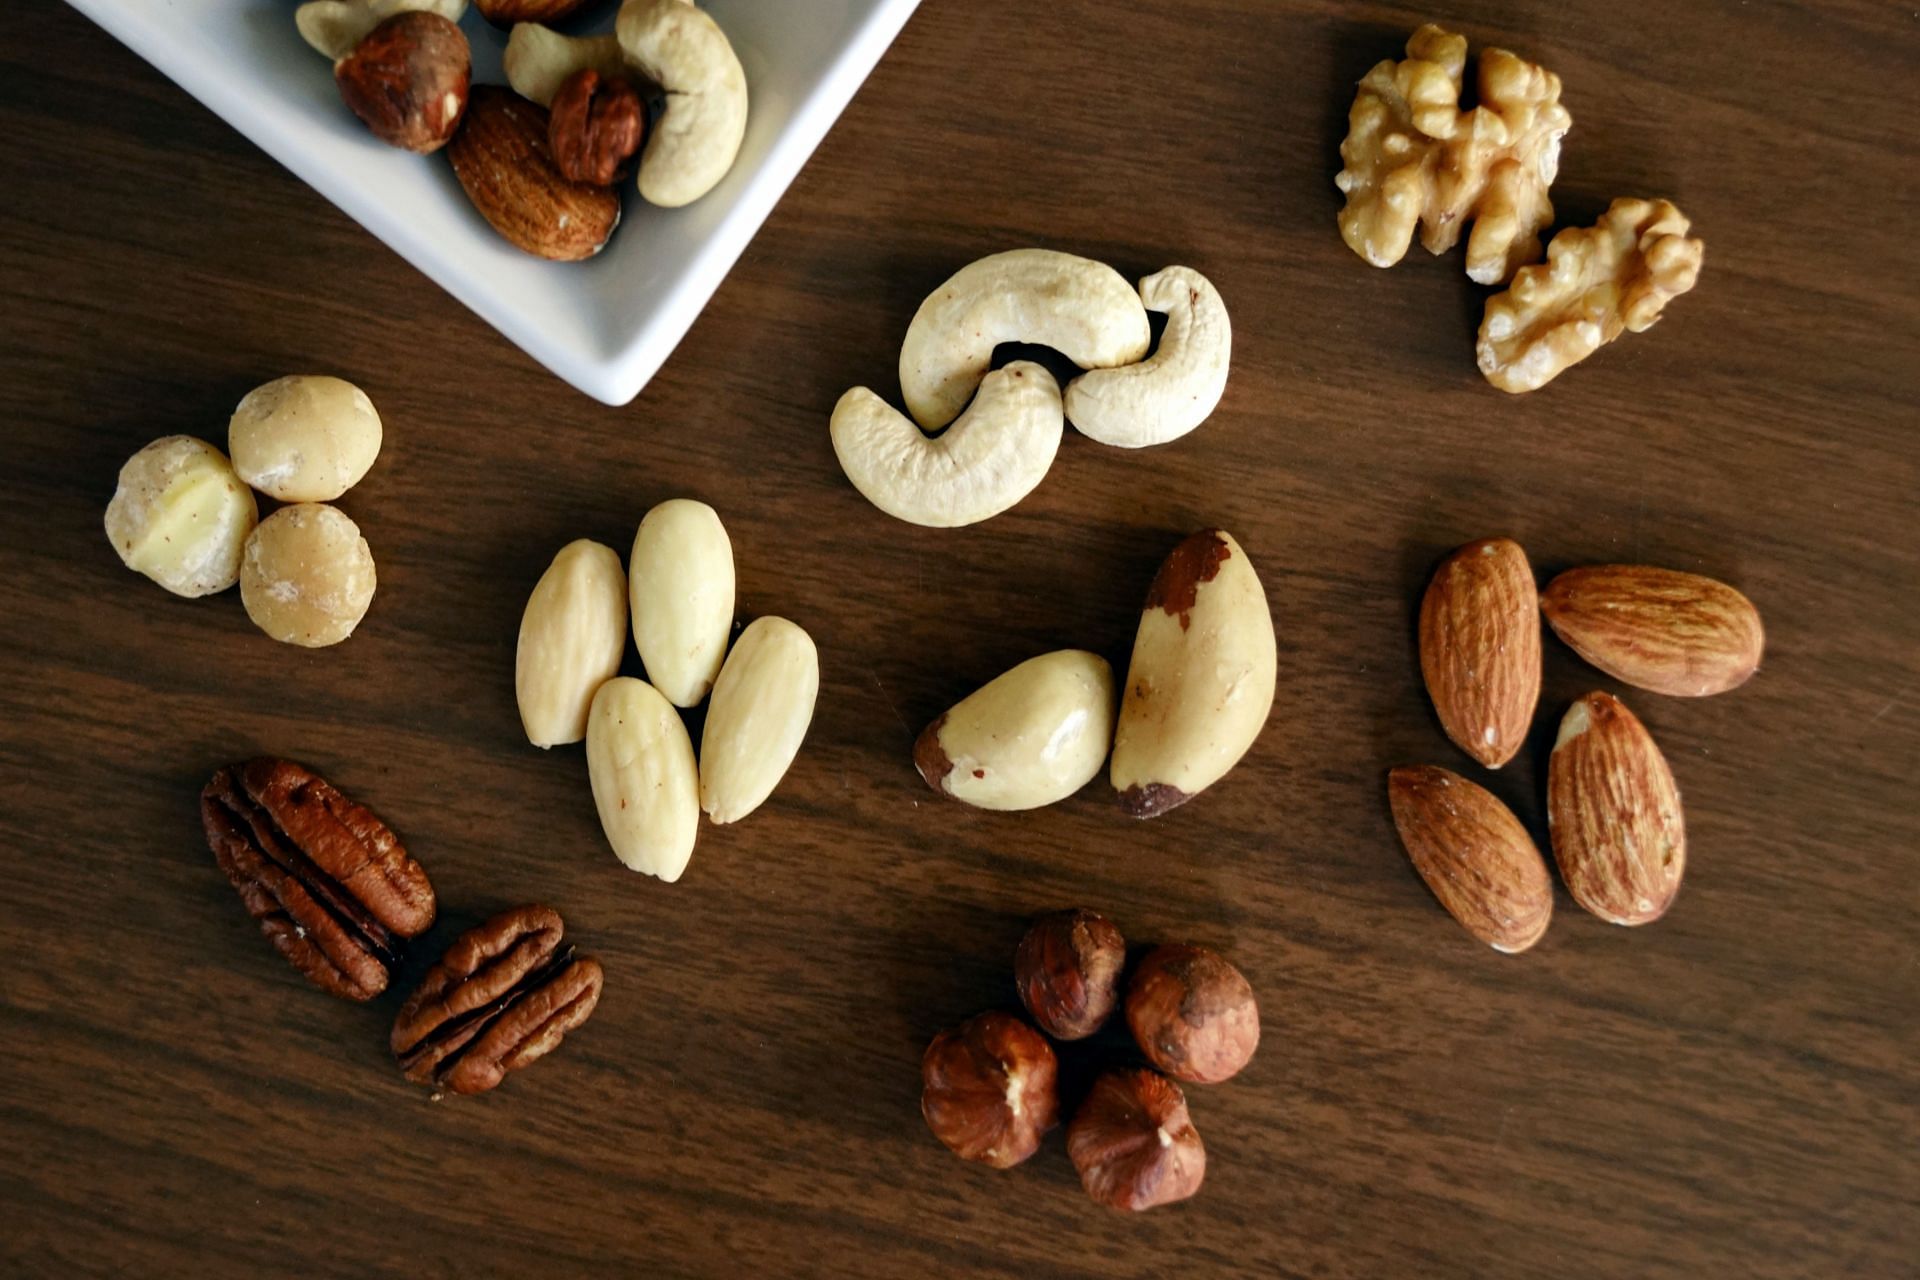 Nuts to reduce anxiety (image sourced via Pexels / Photo by Marta Branco)